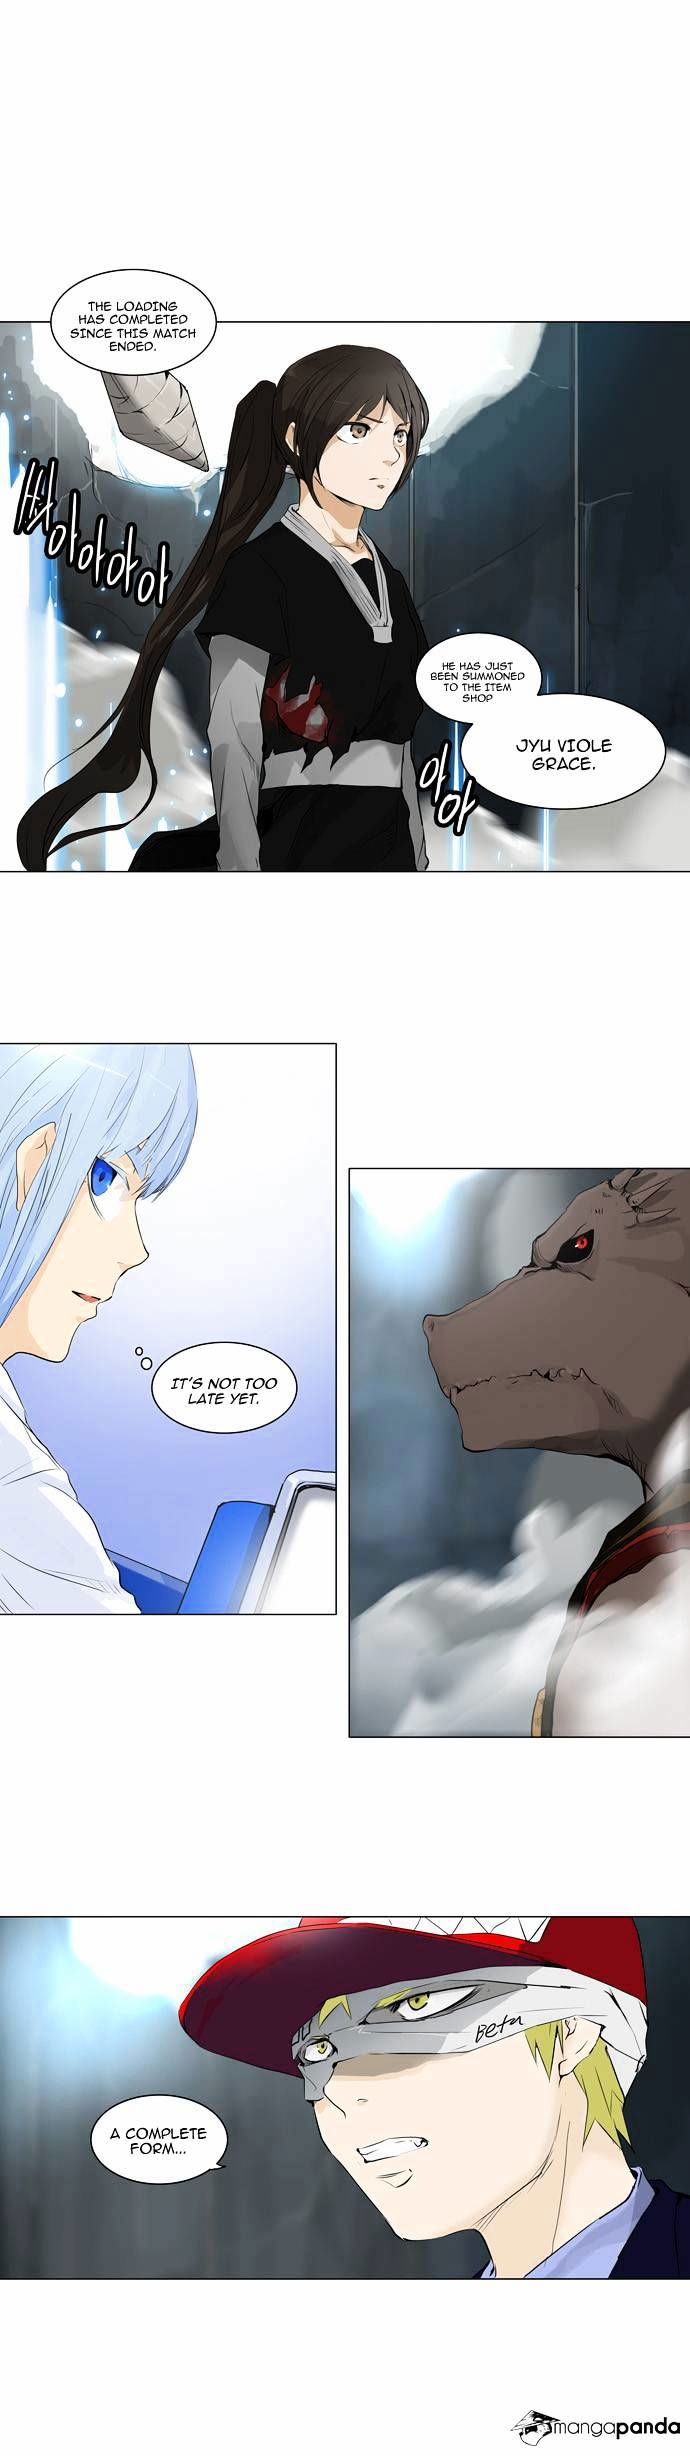 Tower of God Chapter 175 page 1